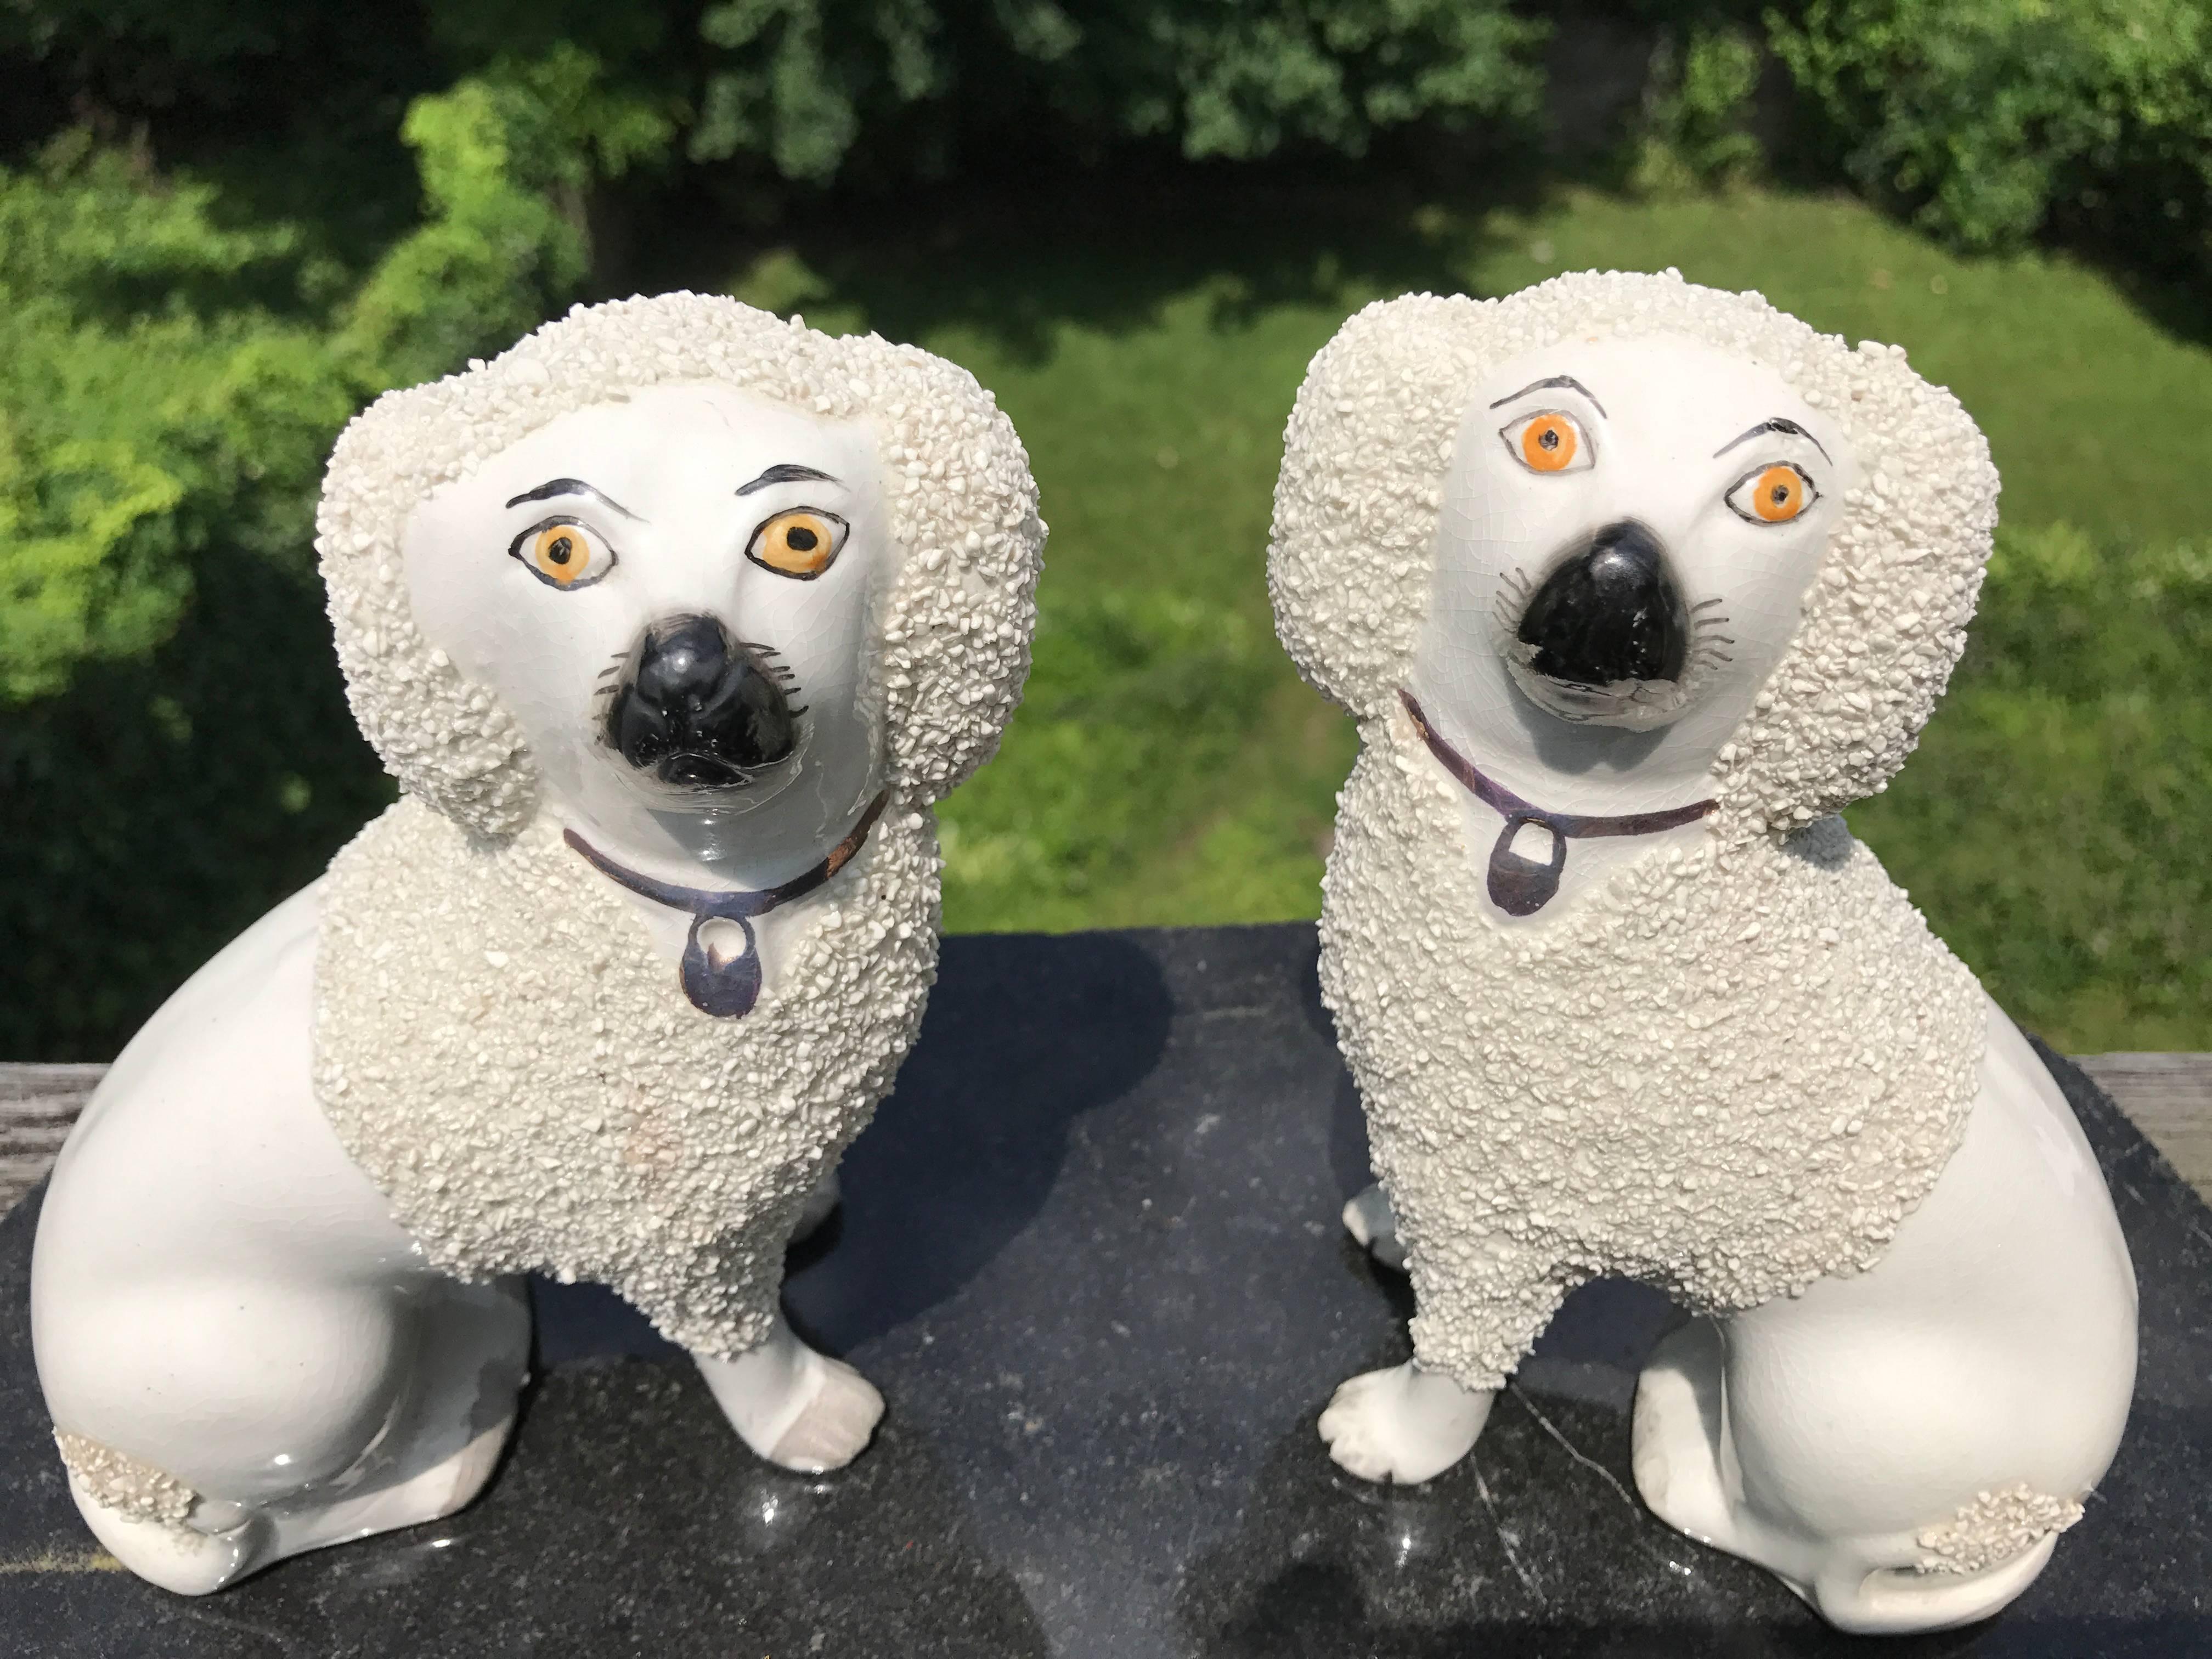 Fine pair of English Staffordshire porcelain spaniels with the endearing bewildered expressions that make the better quality examples most appealing. A particularly charming pair.